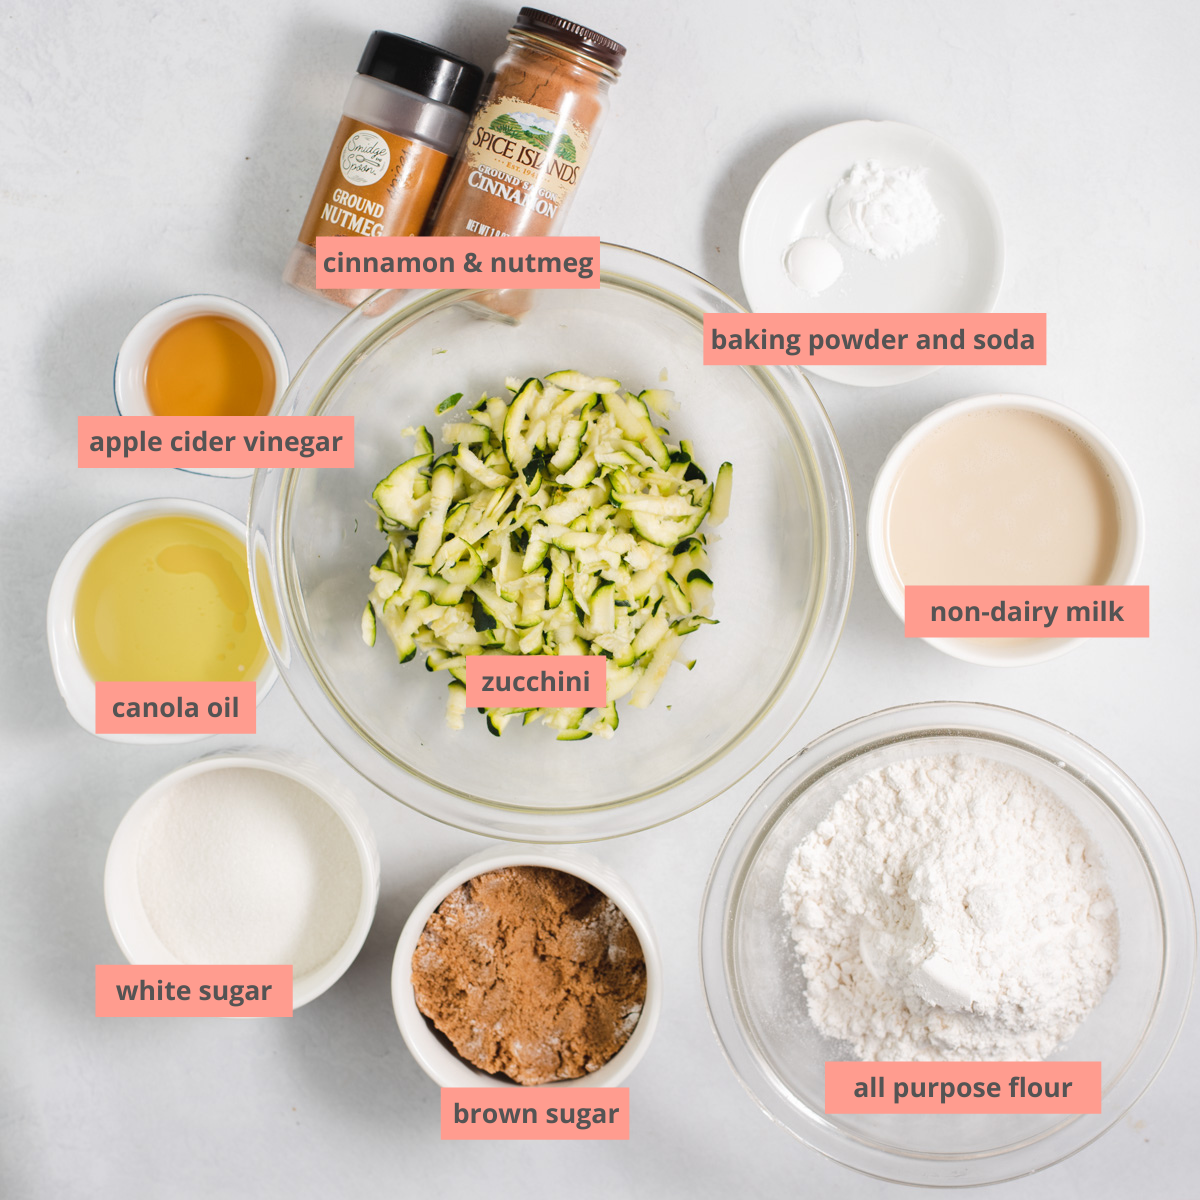 Ingredients to make zucchini bread with labels.